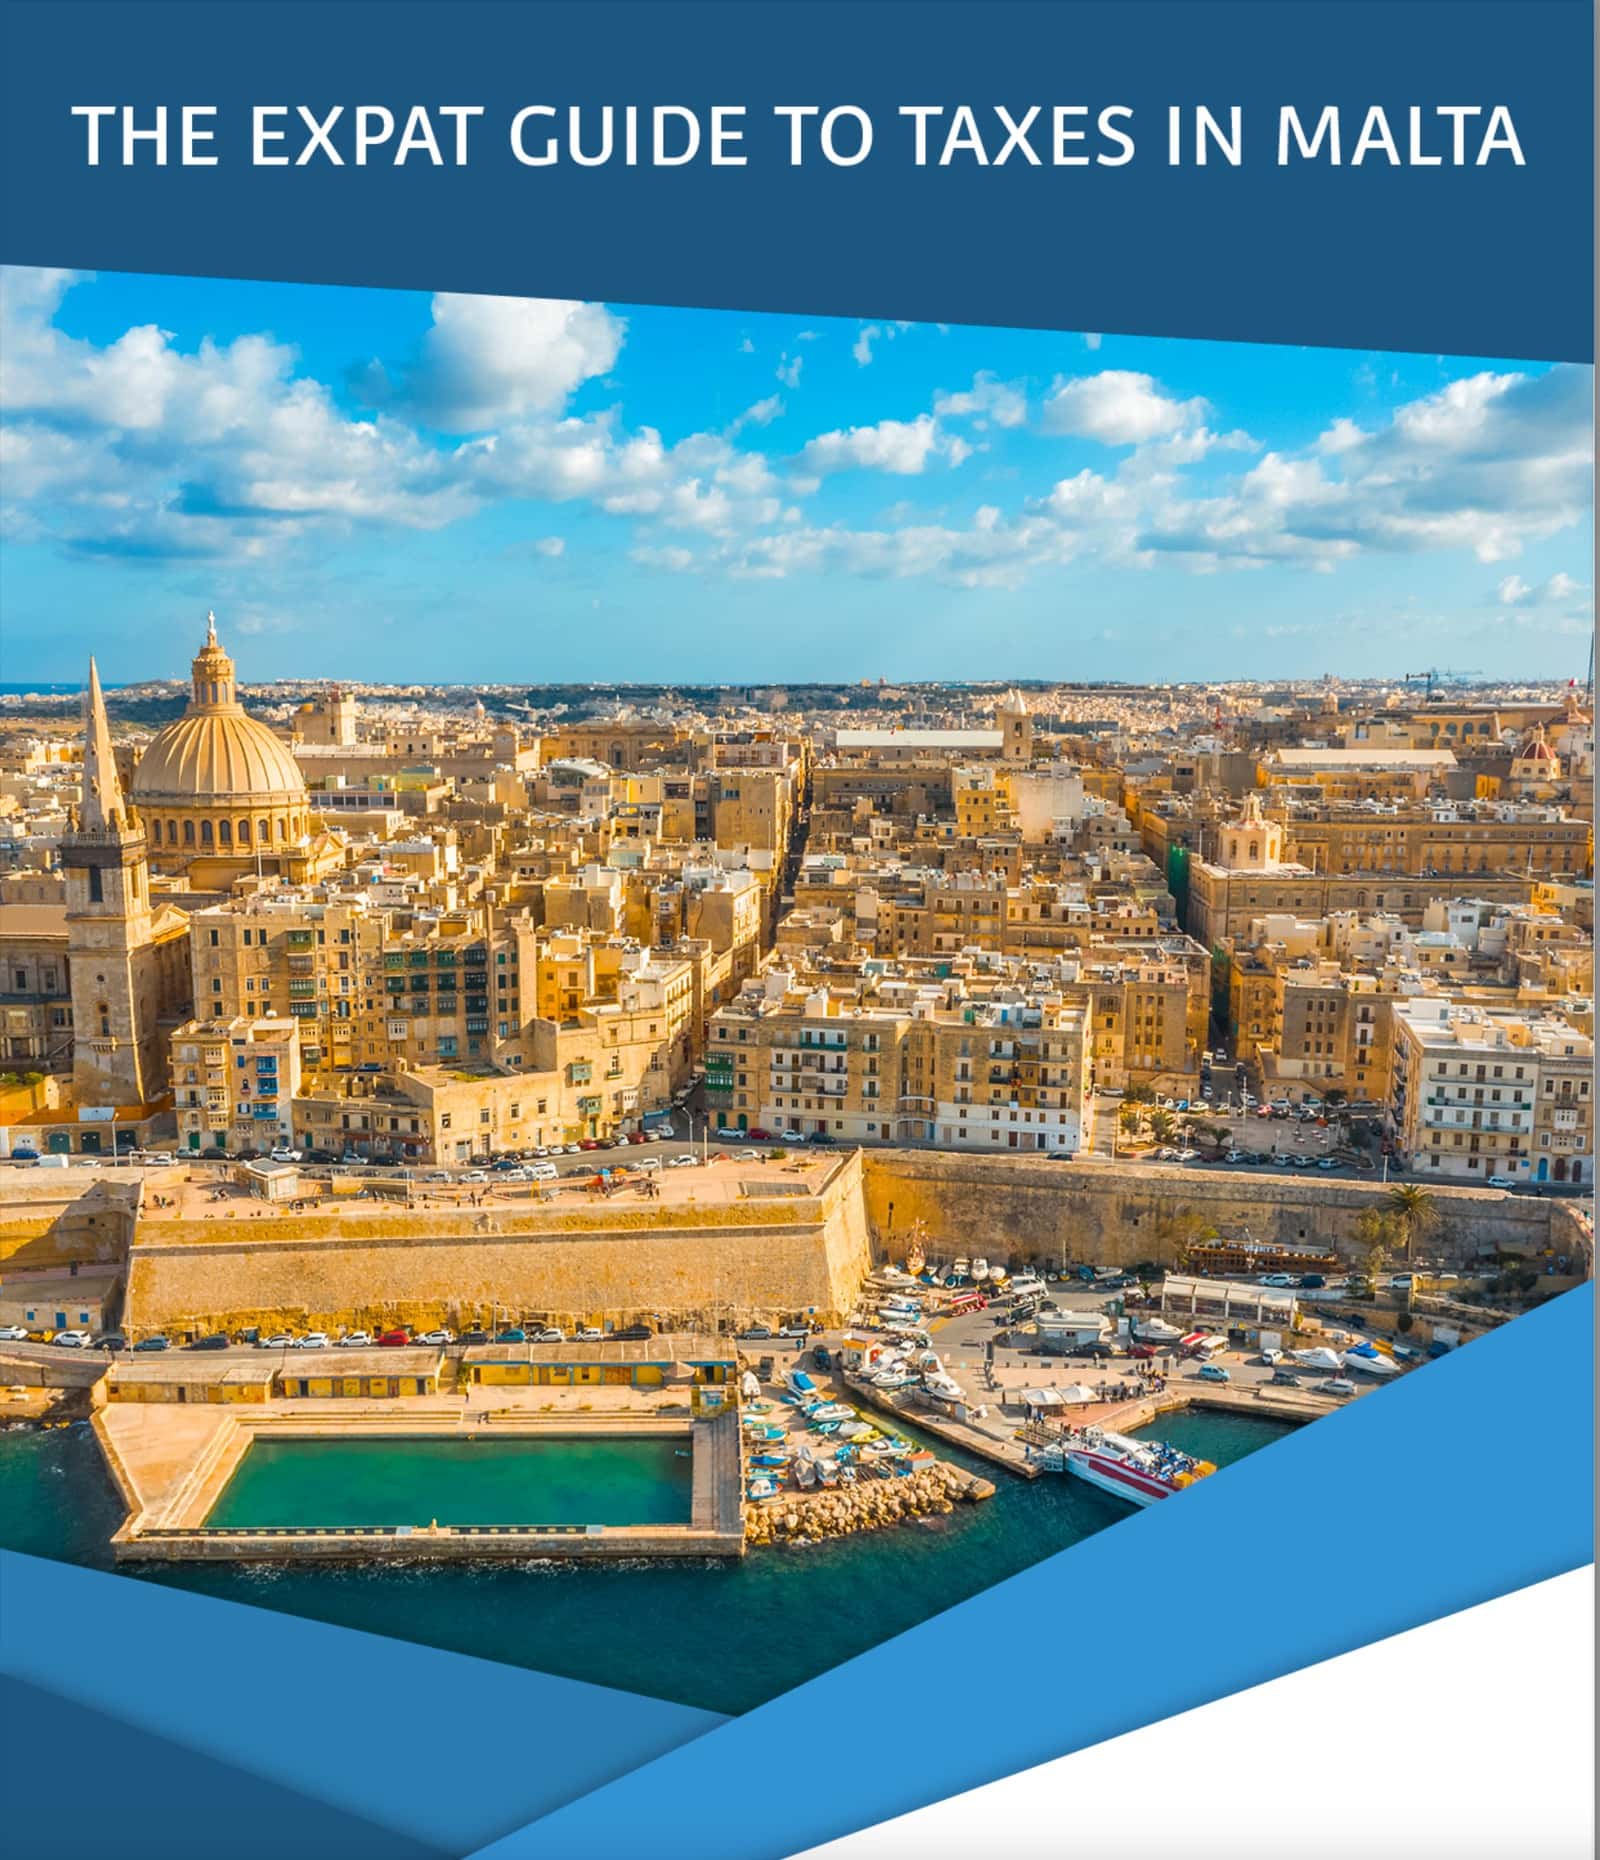 The Expat Guide to Taxes in Malta